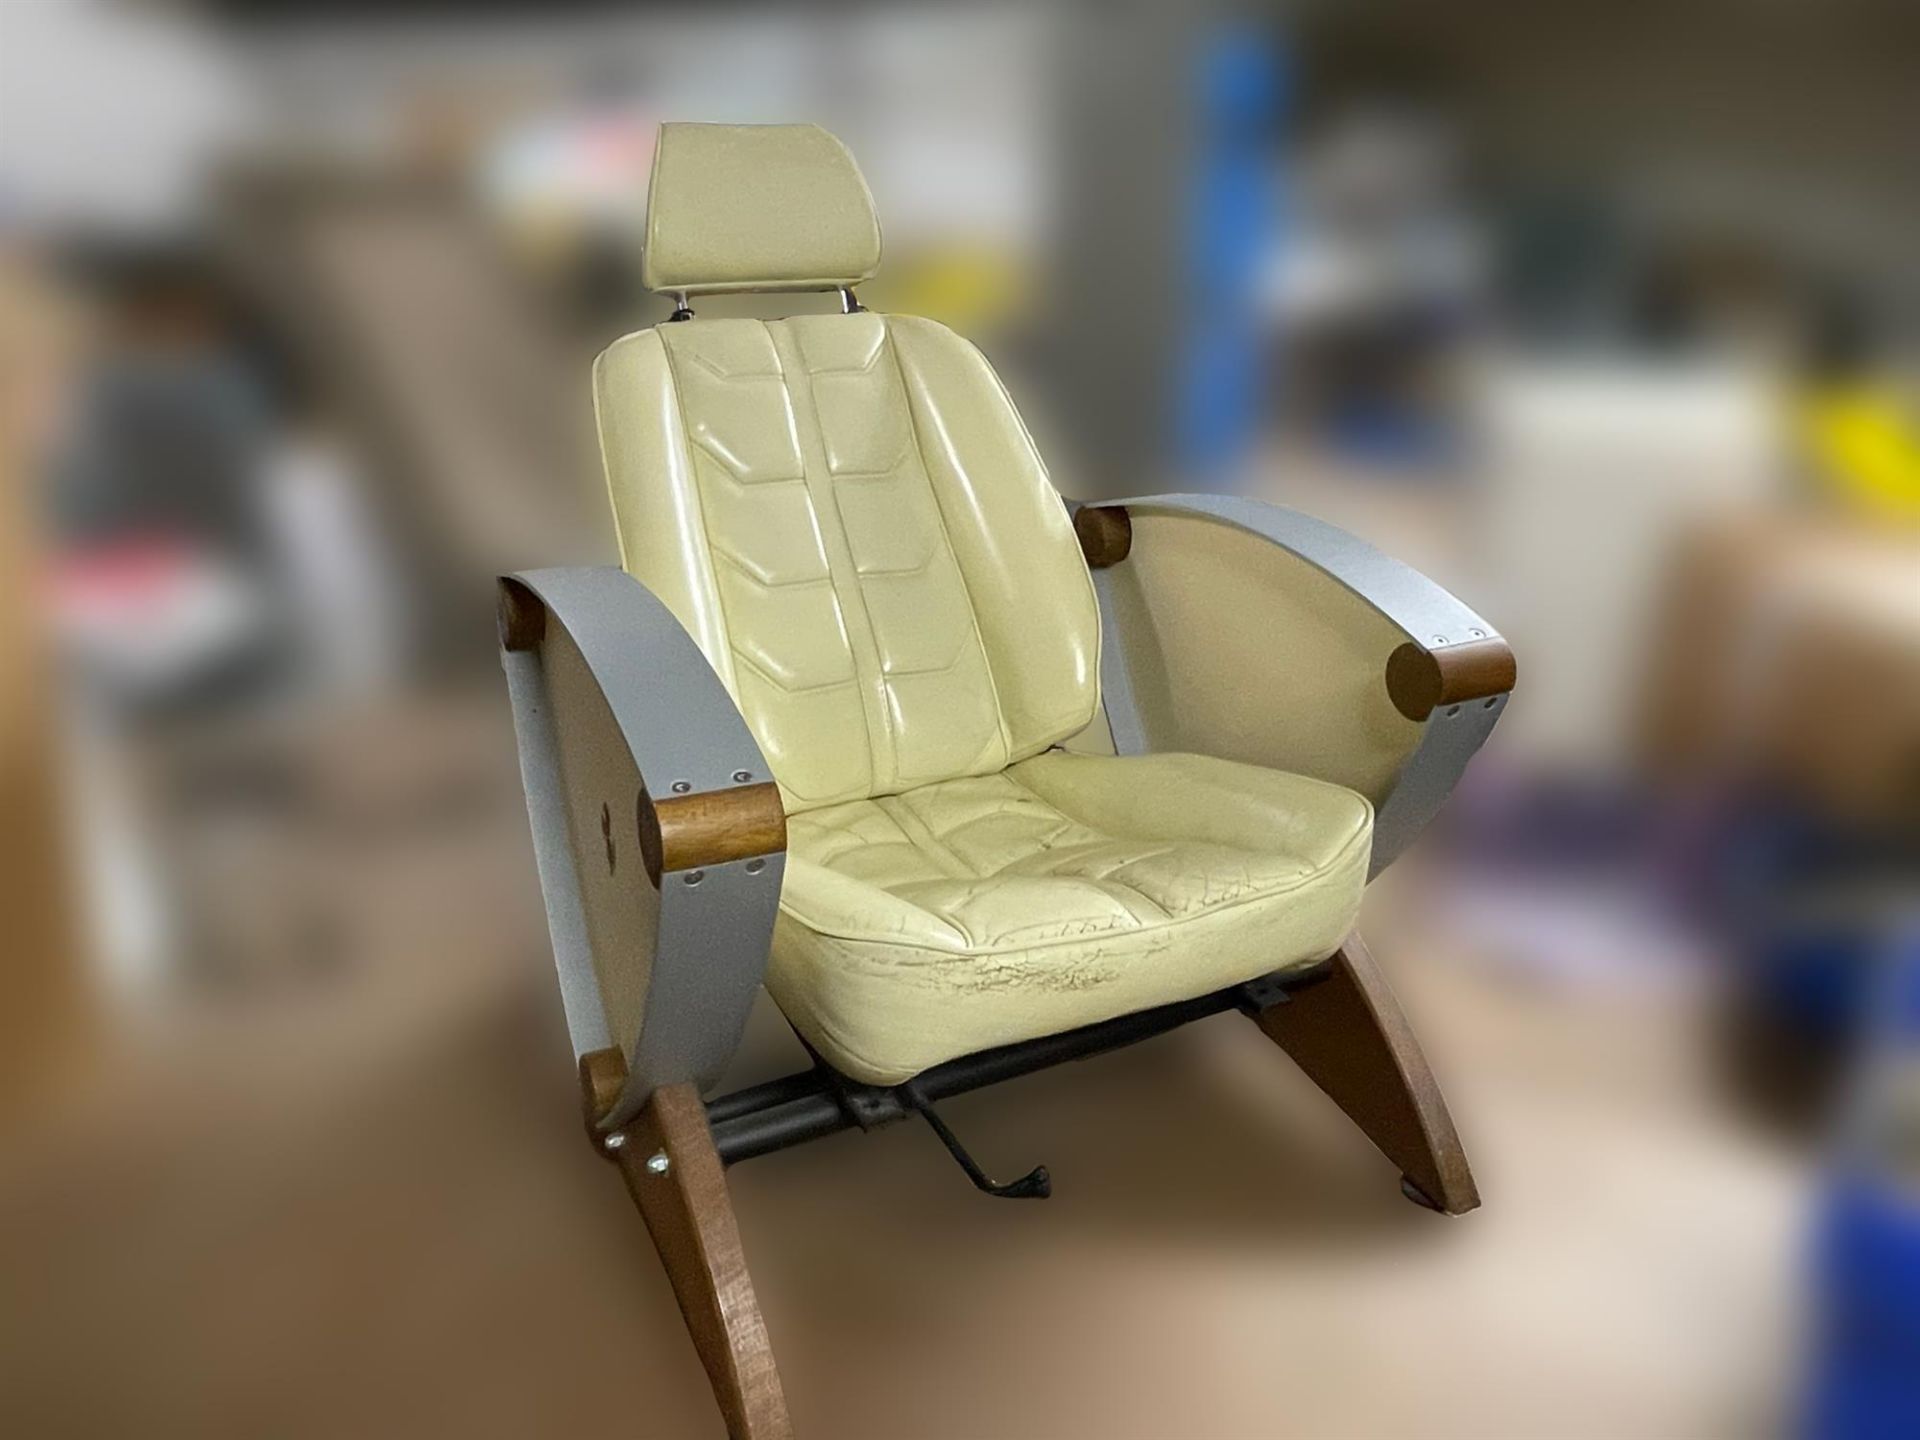 Pair of Ferrari 308 Crema Leather Seats on Substantial Bases - Image 2 of 10